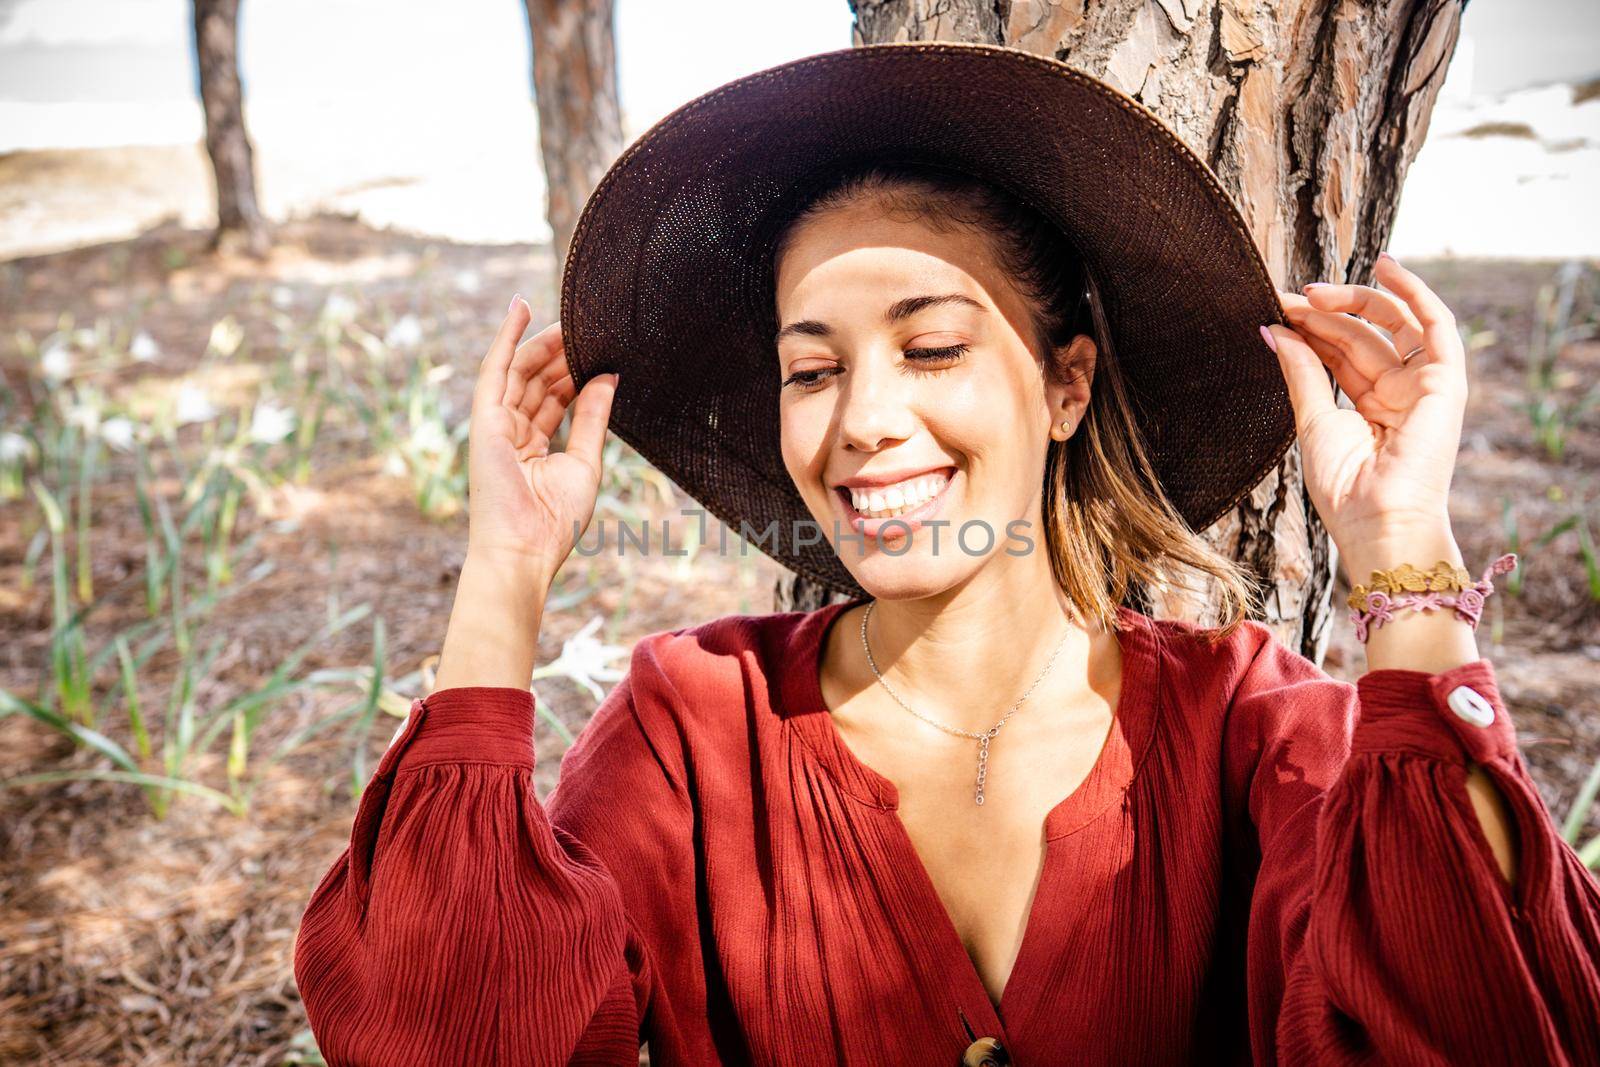 Toothy smiling Beautiful candid young model , wearing red shirt standing in nature pine forest illuminated from the sun holding with her hands brims of her wide hat. Fashion shoot for spring concept